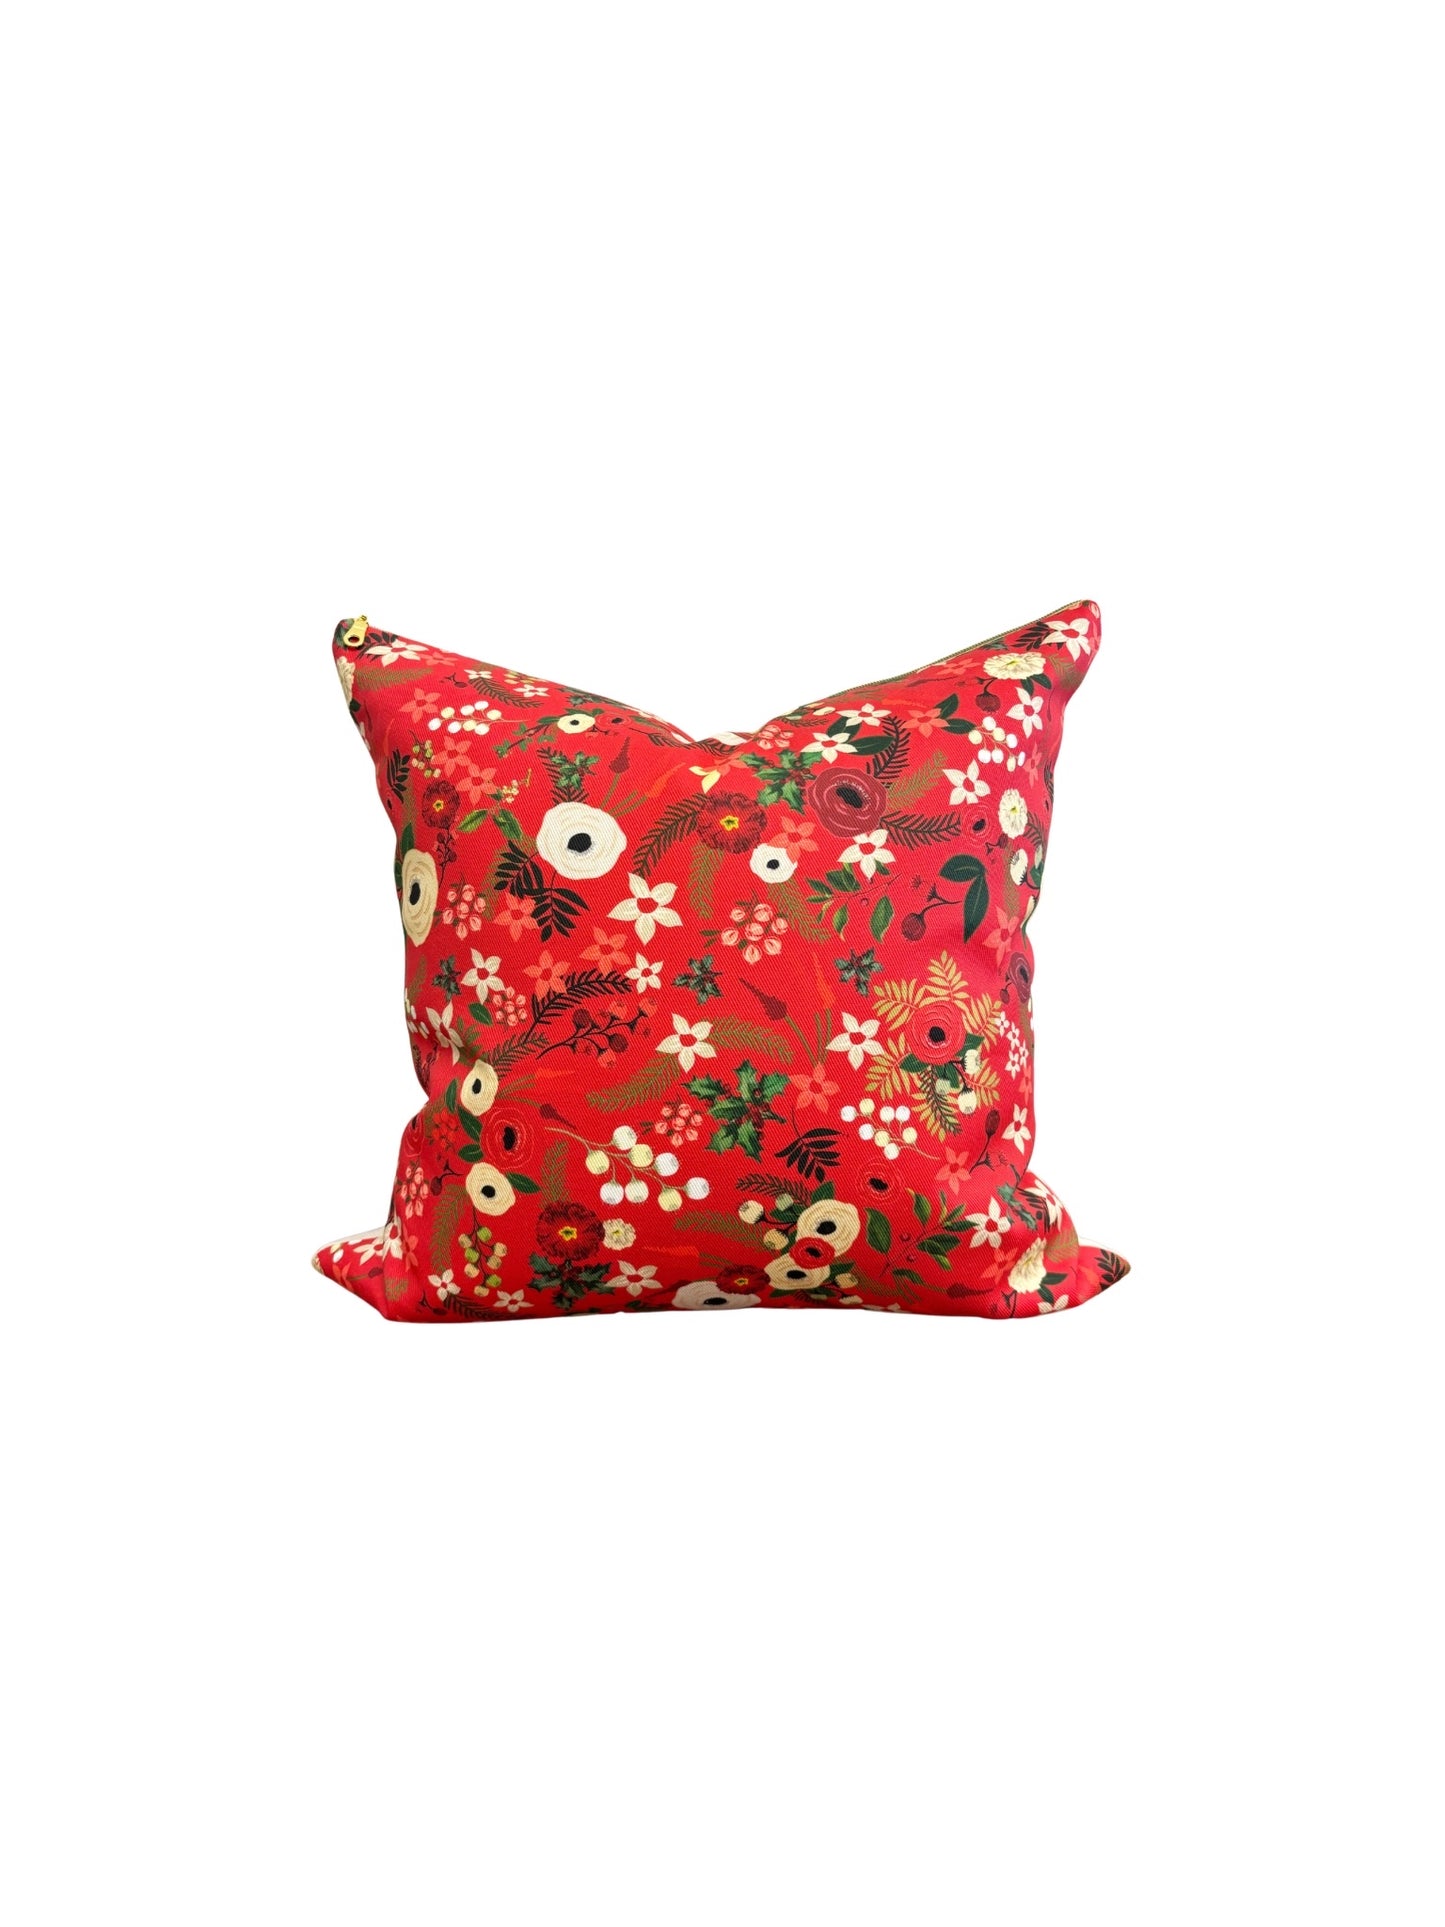 Vintage Christmas Pillow Cover - Red